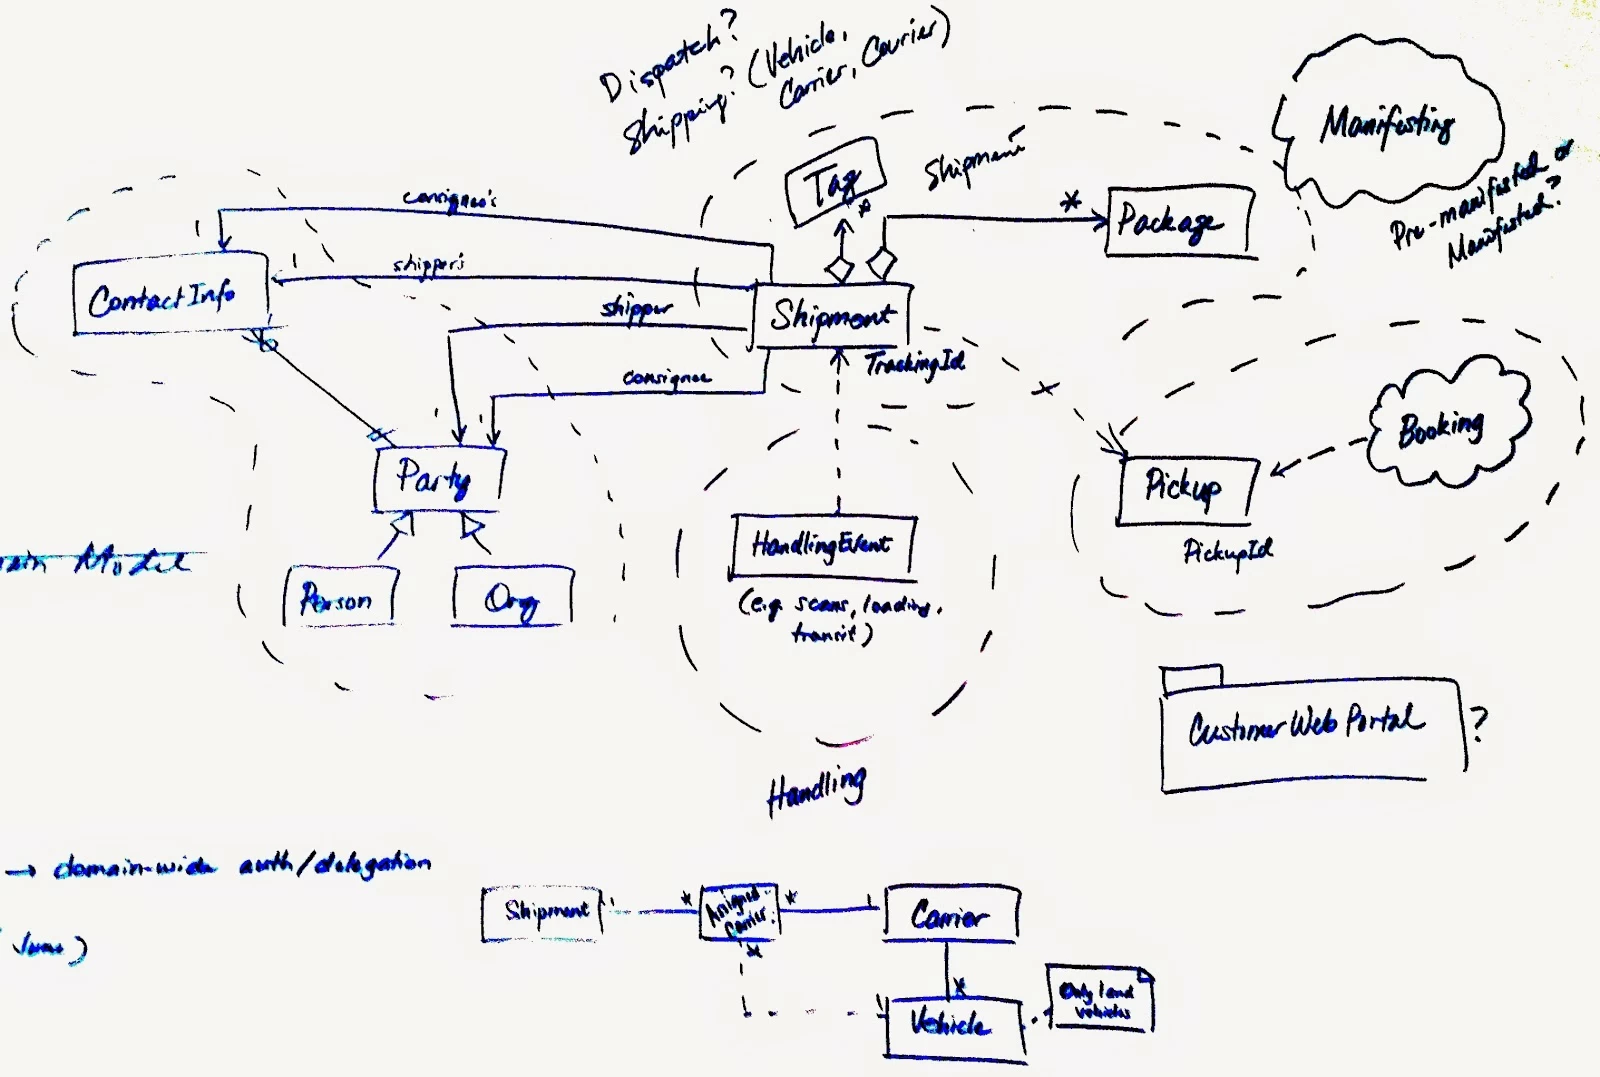 Don't waste time detailing your design on some UML tool. Scribble just enough on a whiteboard for the team to get going. Finish your design in the code itself.